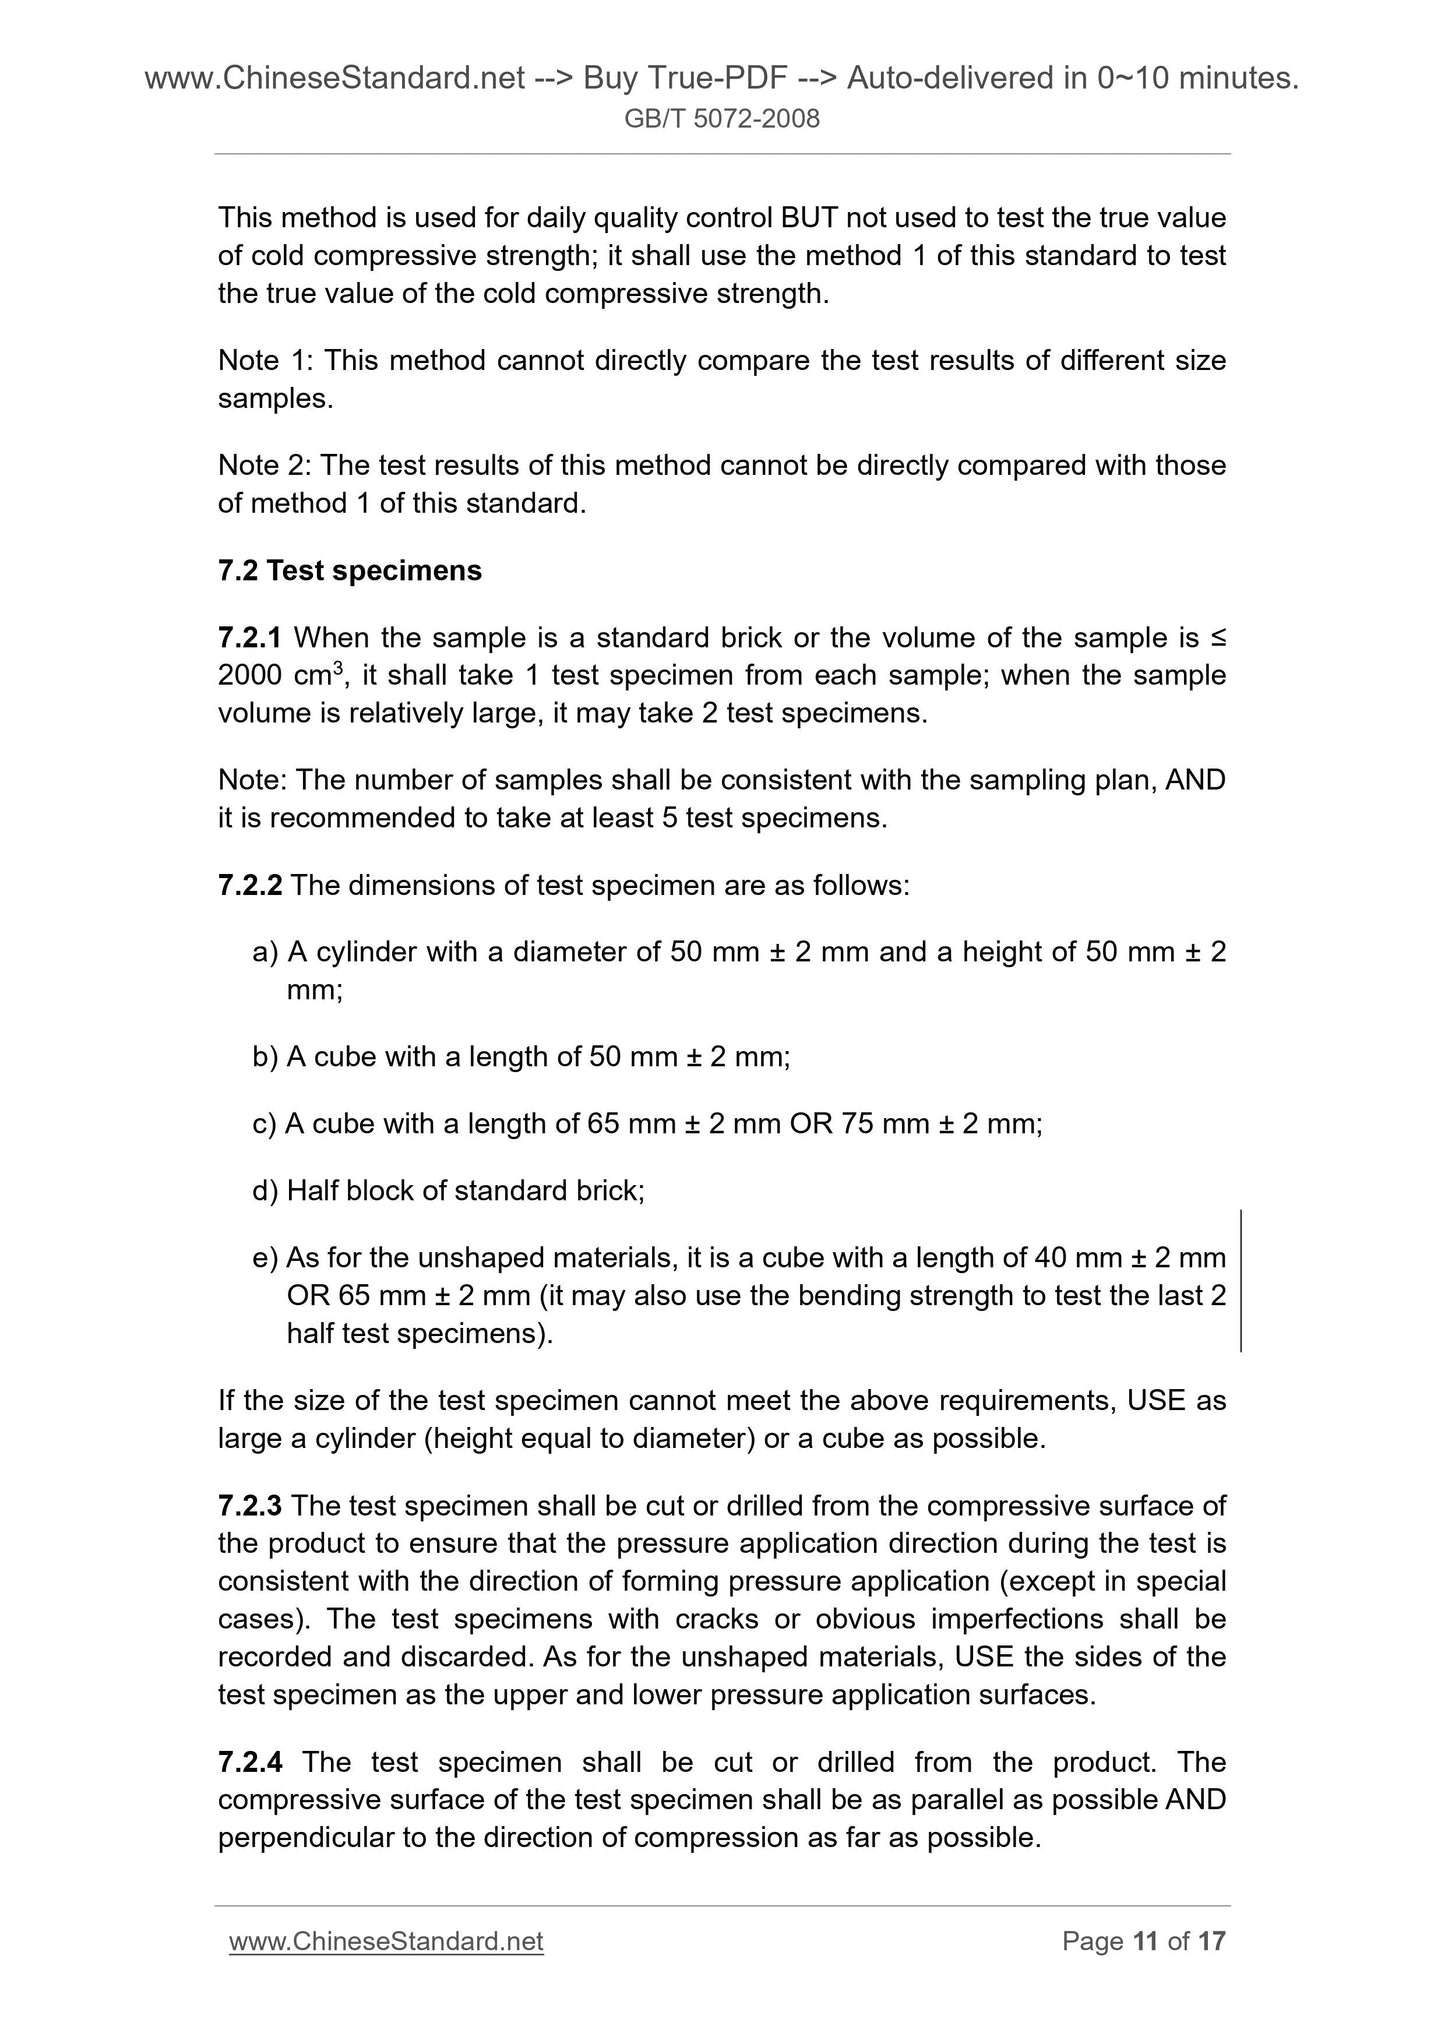 GB/T 5072-2008 Page 7